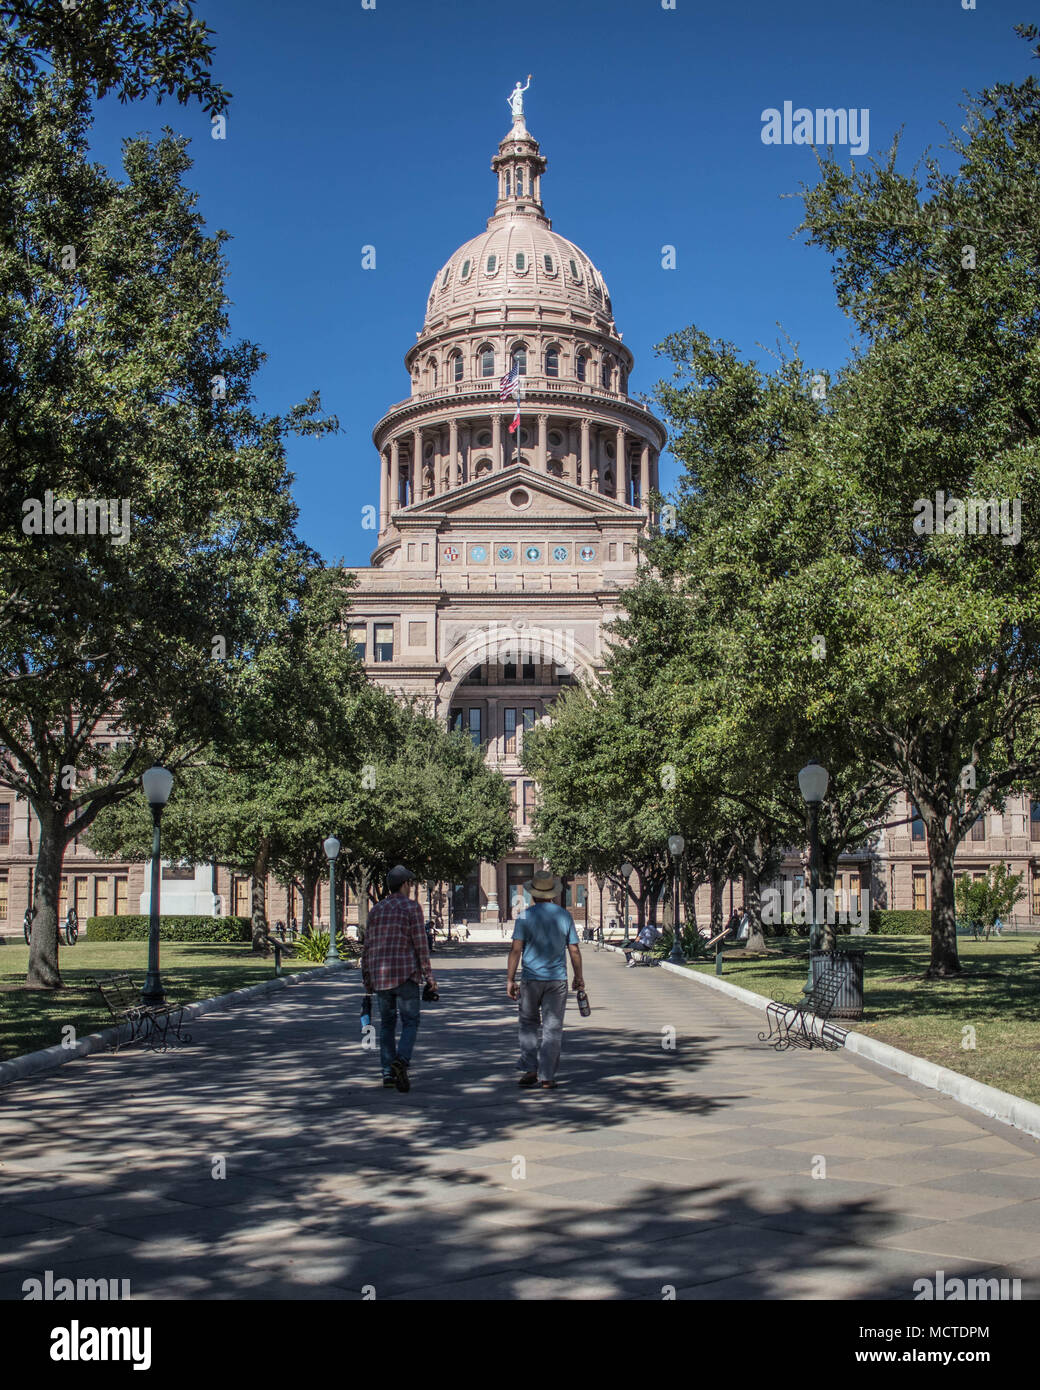 The Texas State Capitol building as seen from the street. Stock Photo